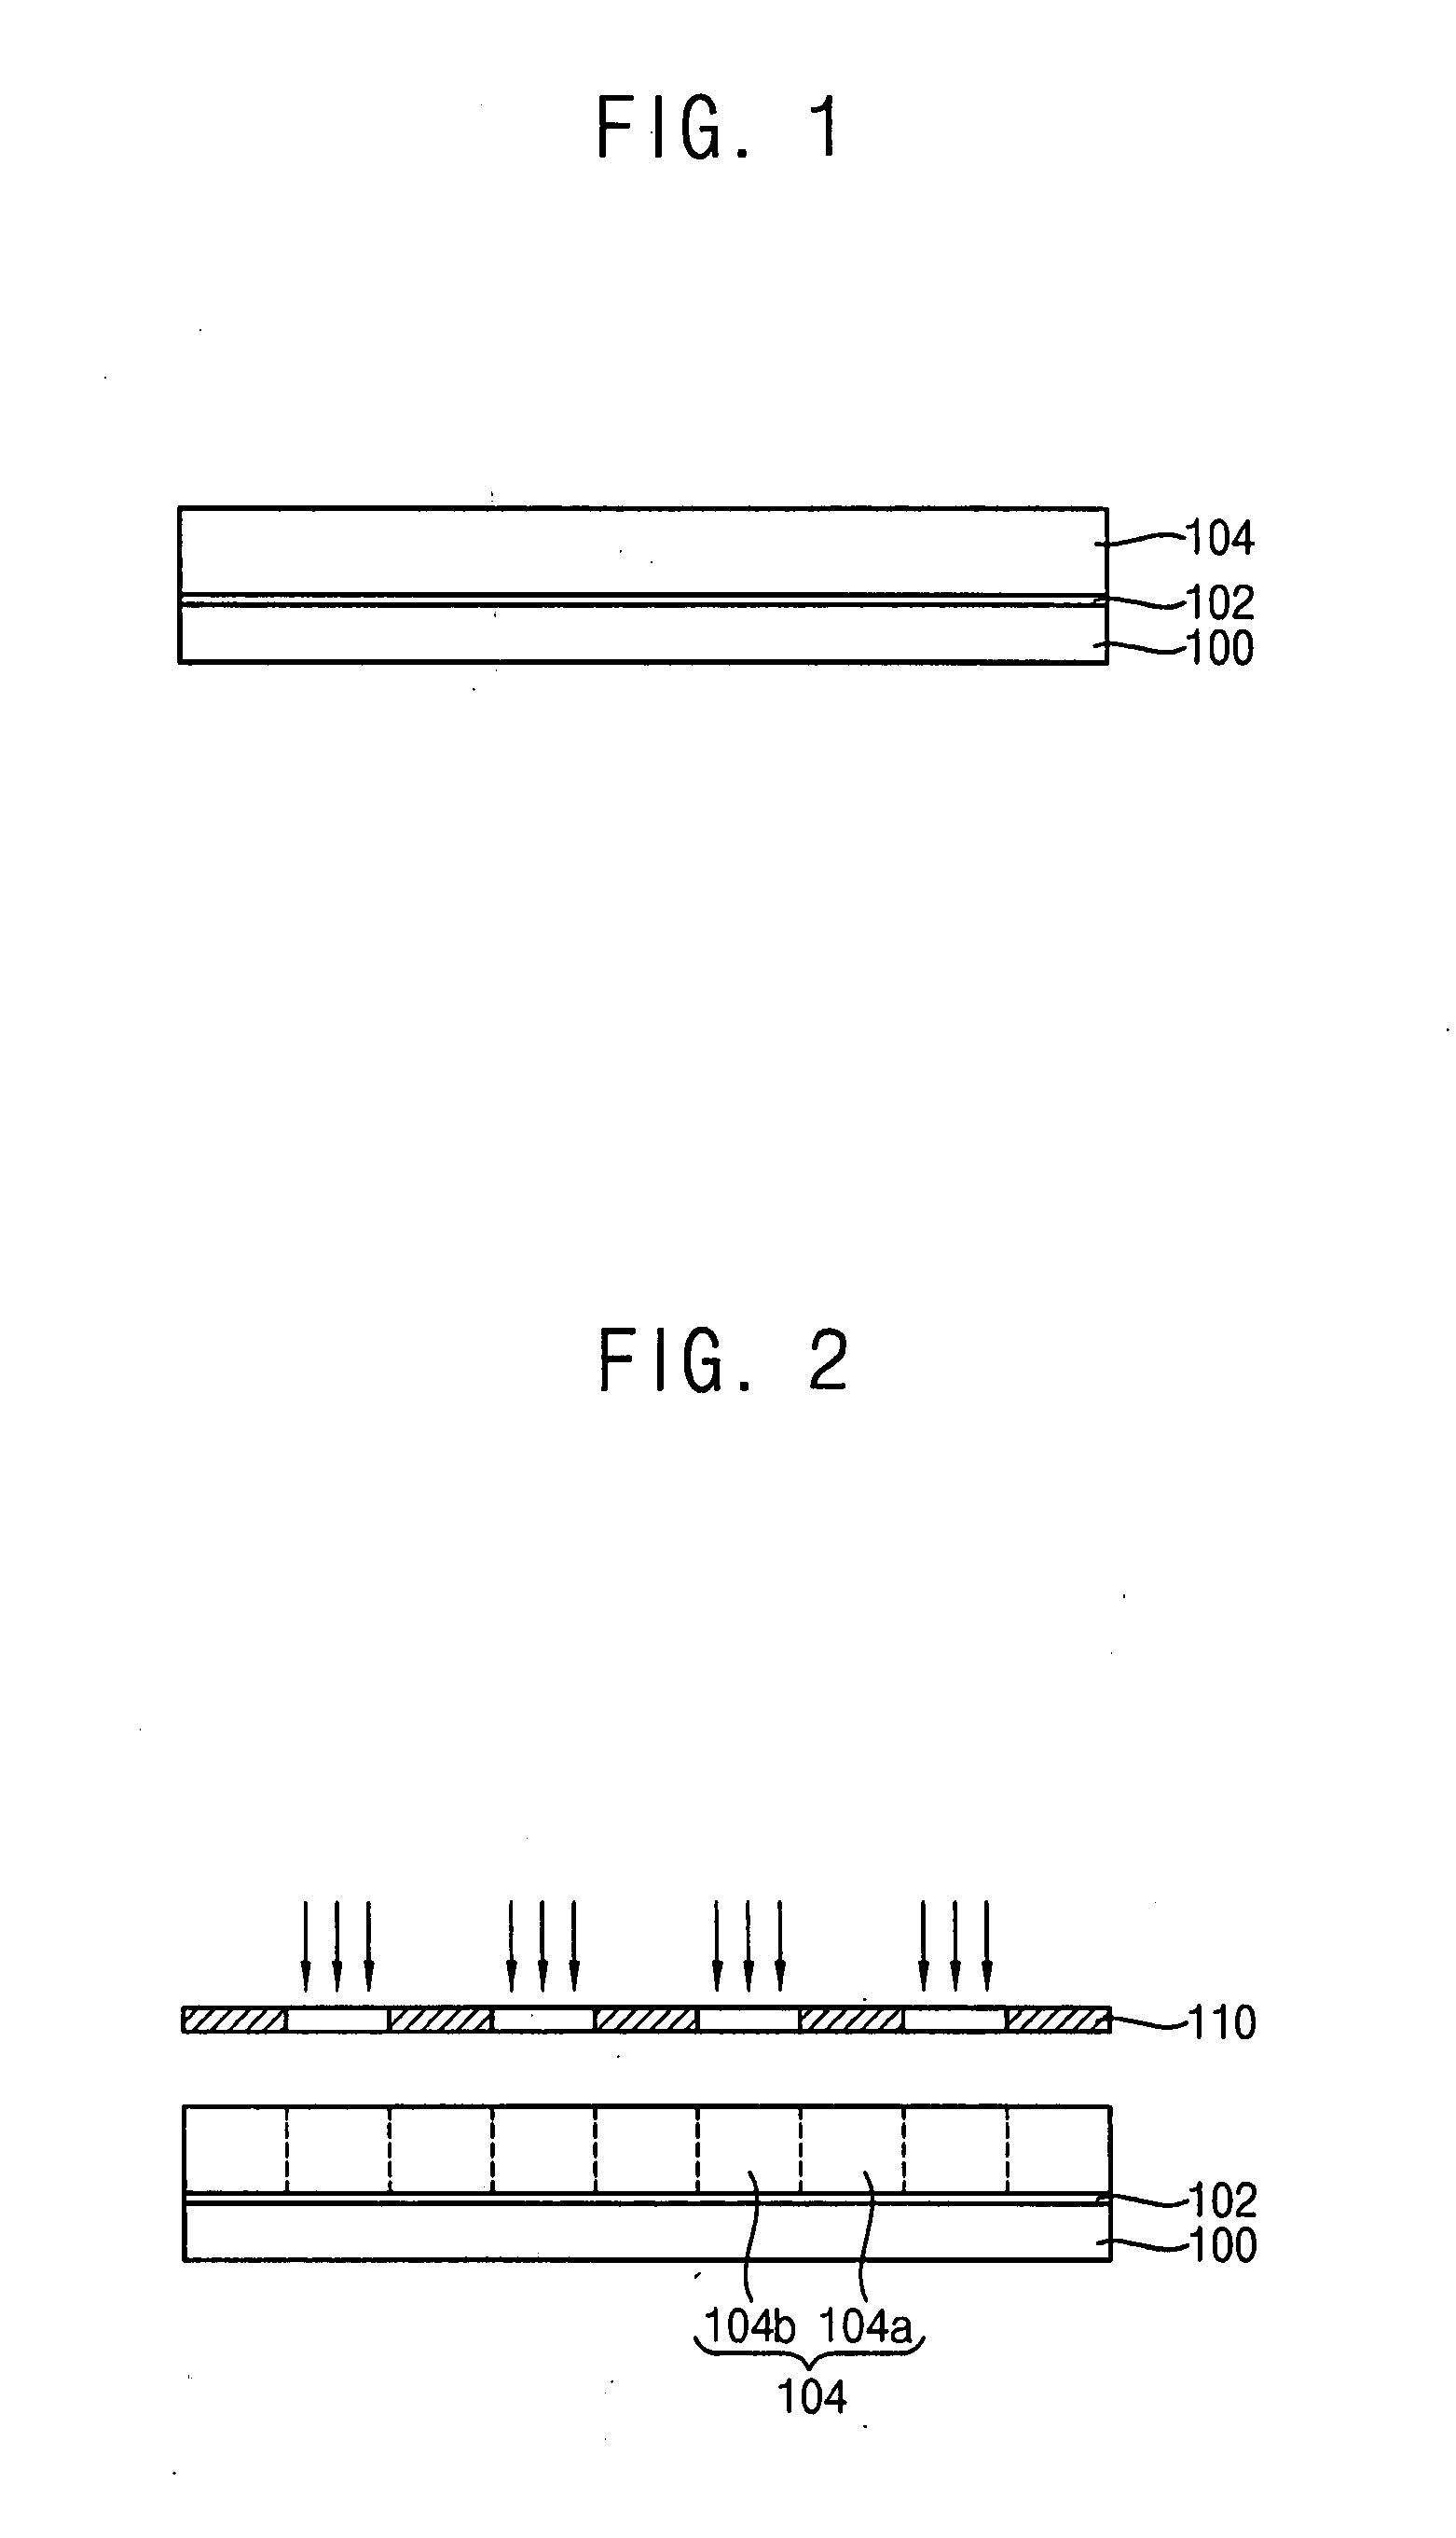 Photoresist compositions and methods of forming a pattern using the same